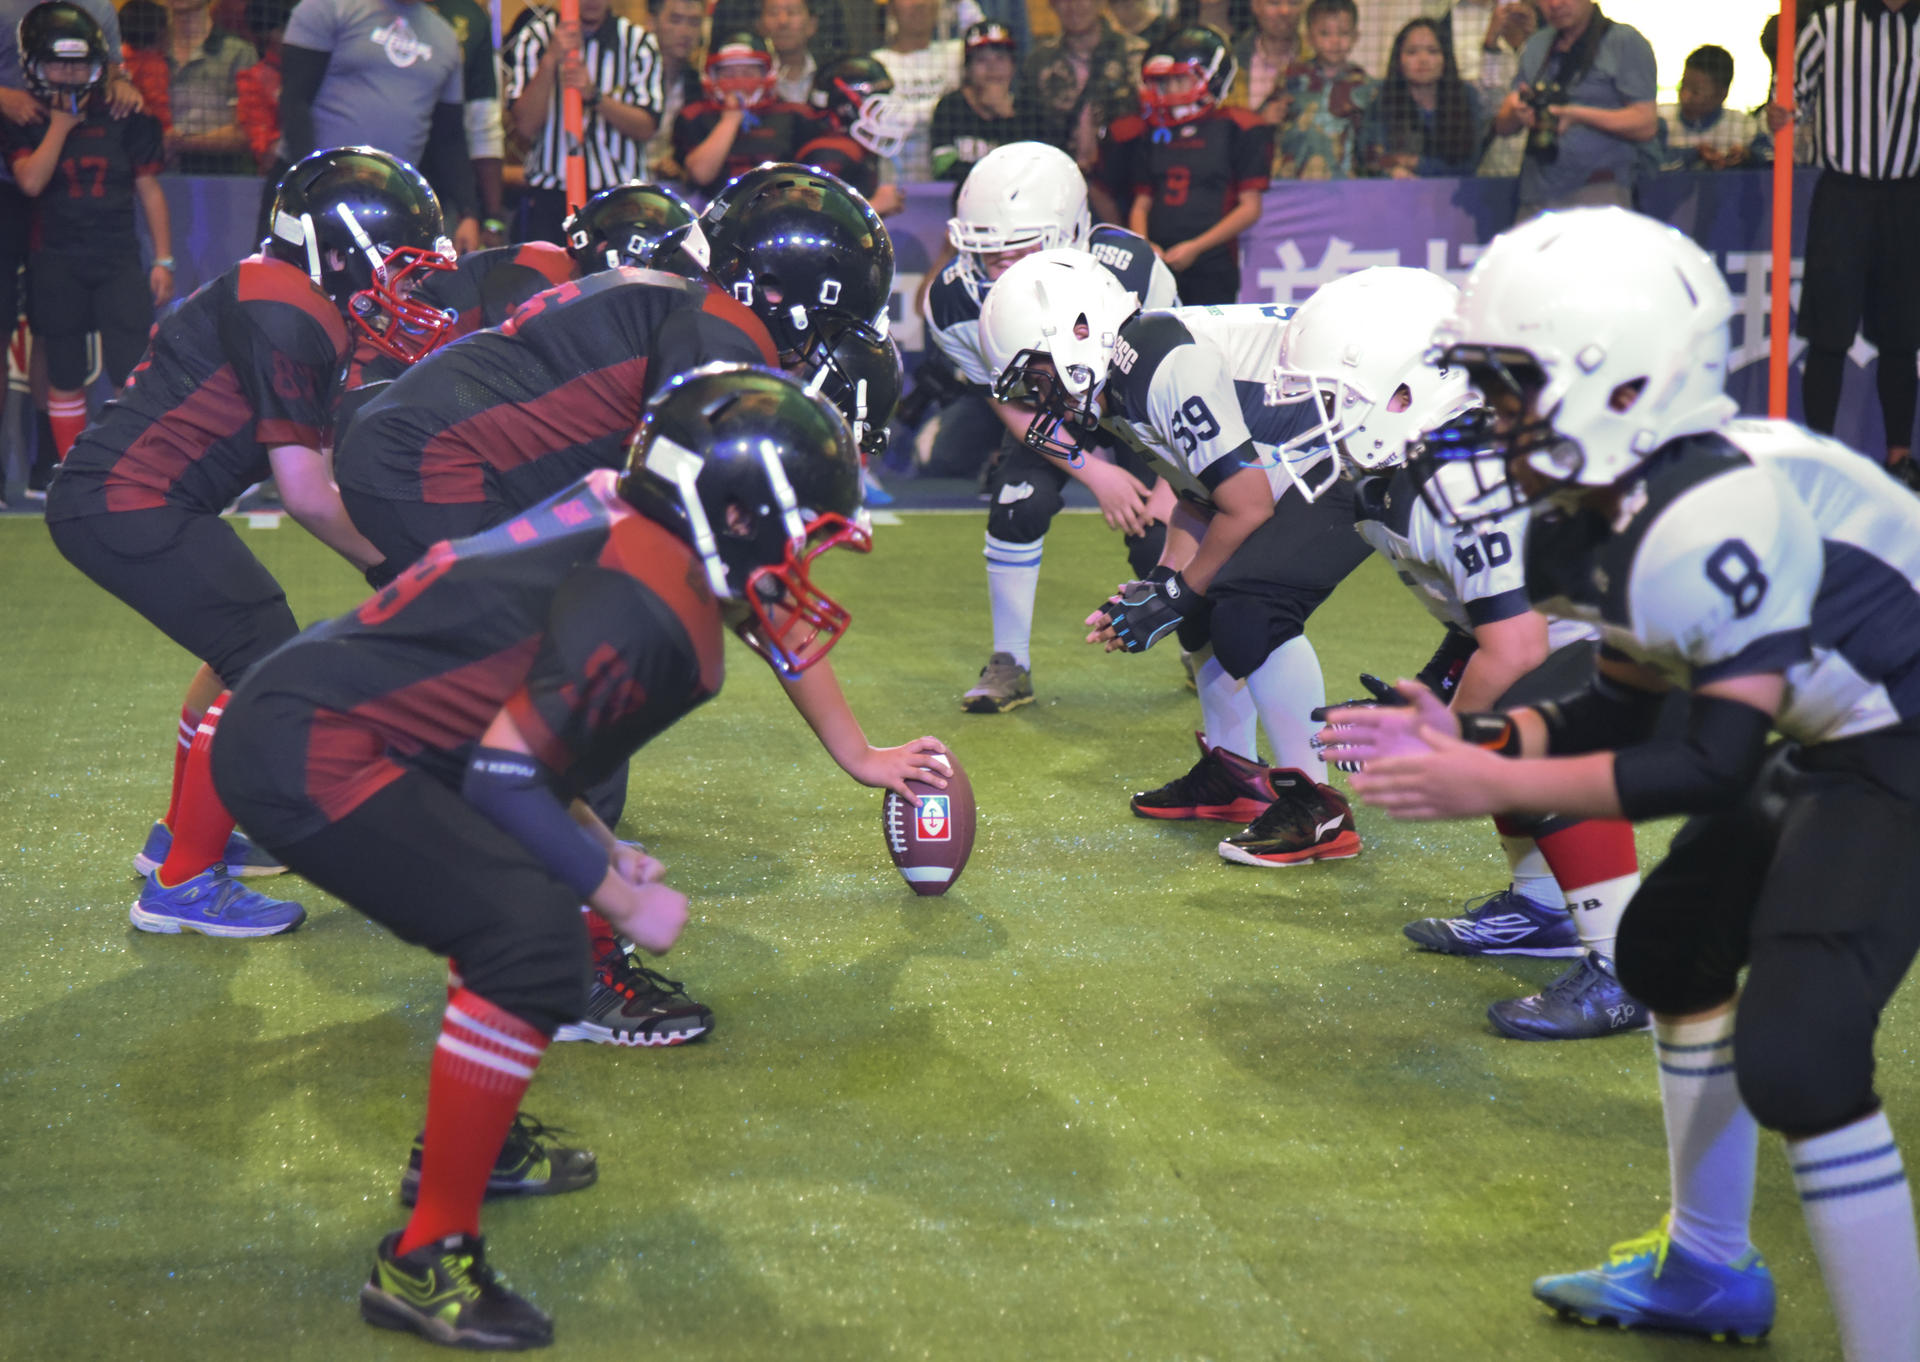 The Vipers (left) and Sharks square off.